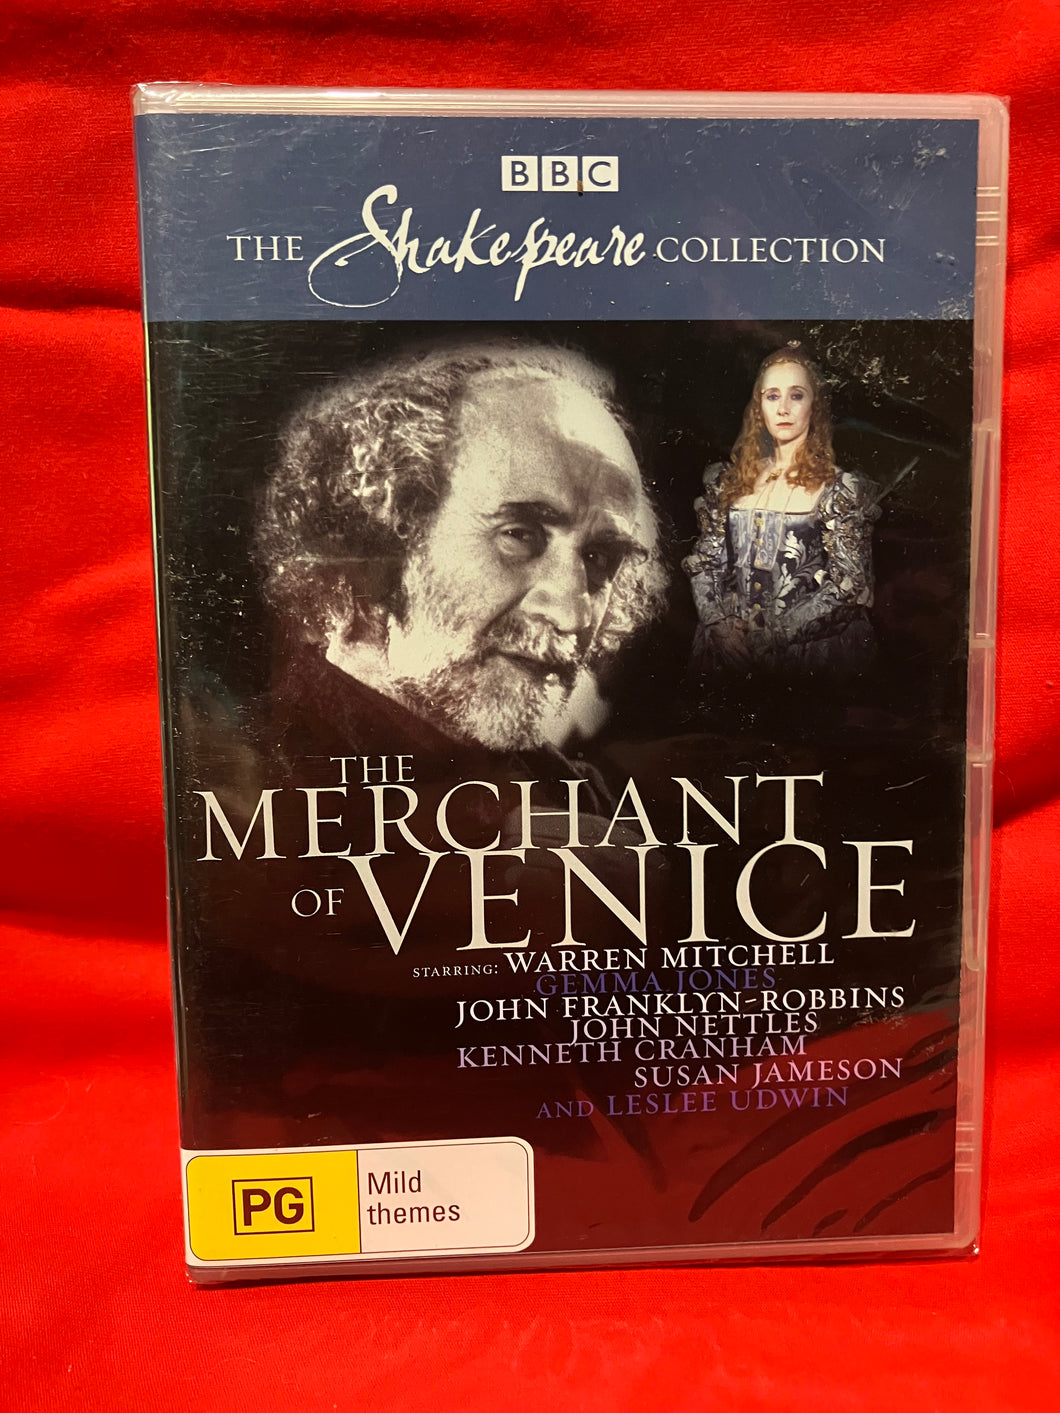 THE MERCHANT OF VENICE - SHAKESPEARE COLLECTION BBC - DVD (SEALED)